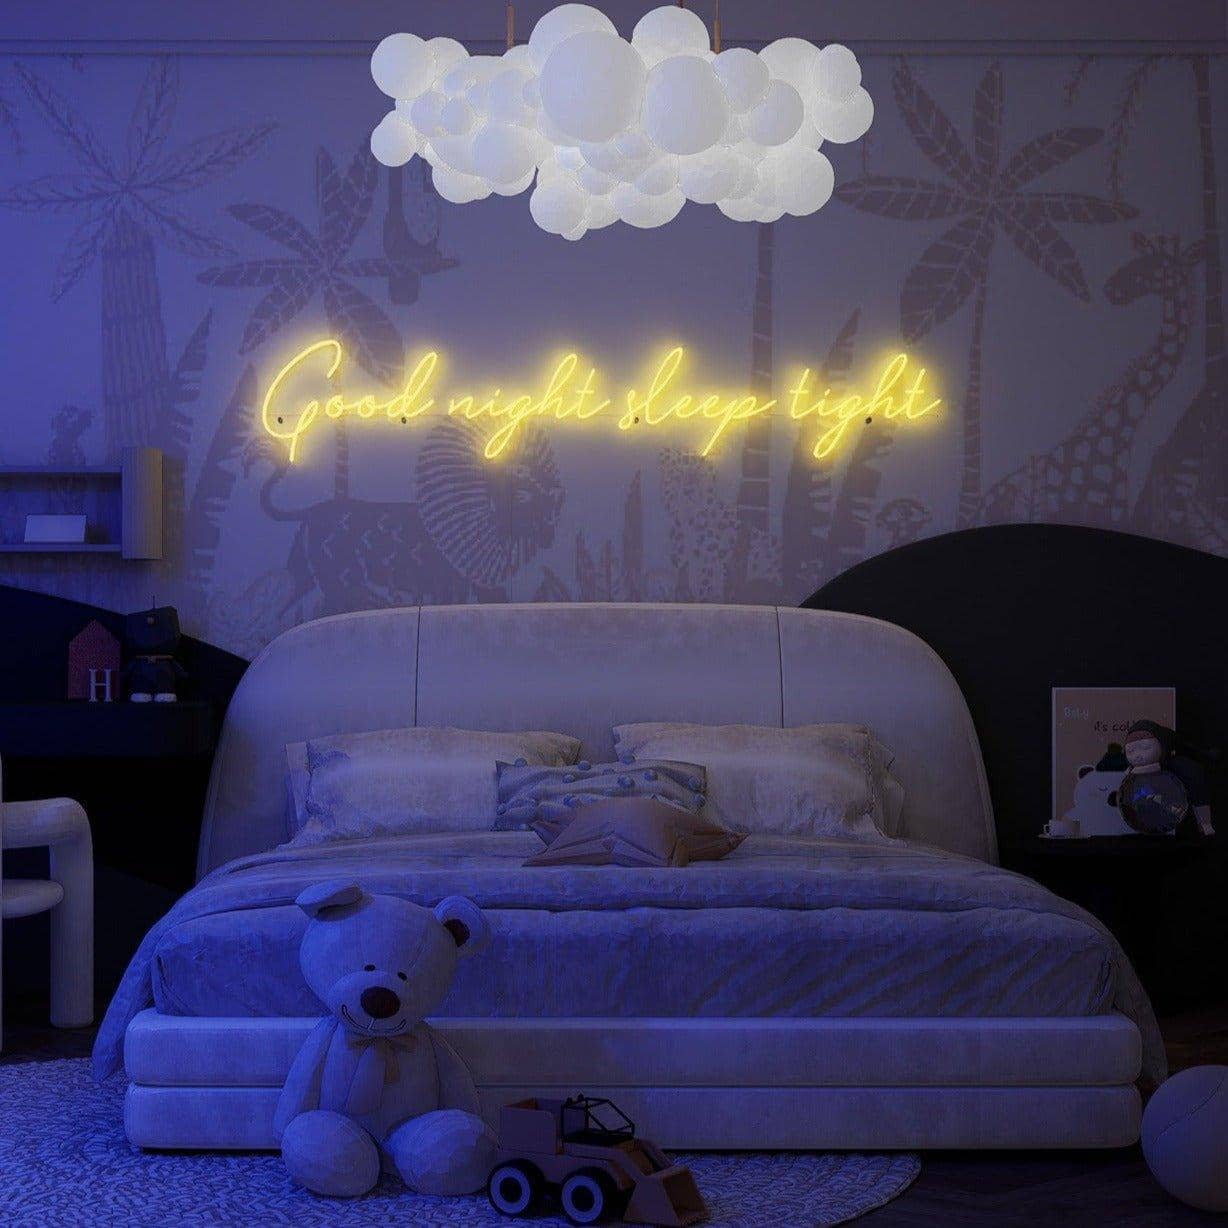 yellow-neon-picture-lit-up-at-night-for-display-on-the-wall-good-night-sleep-tight